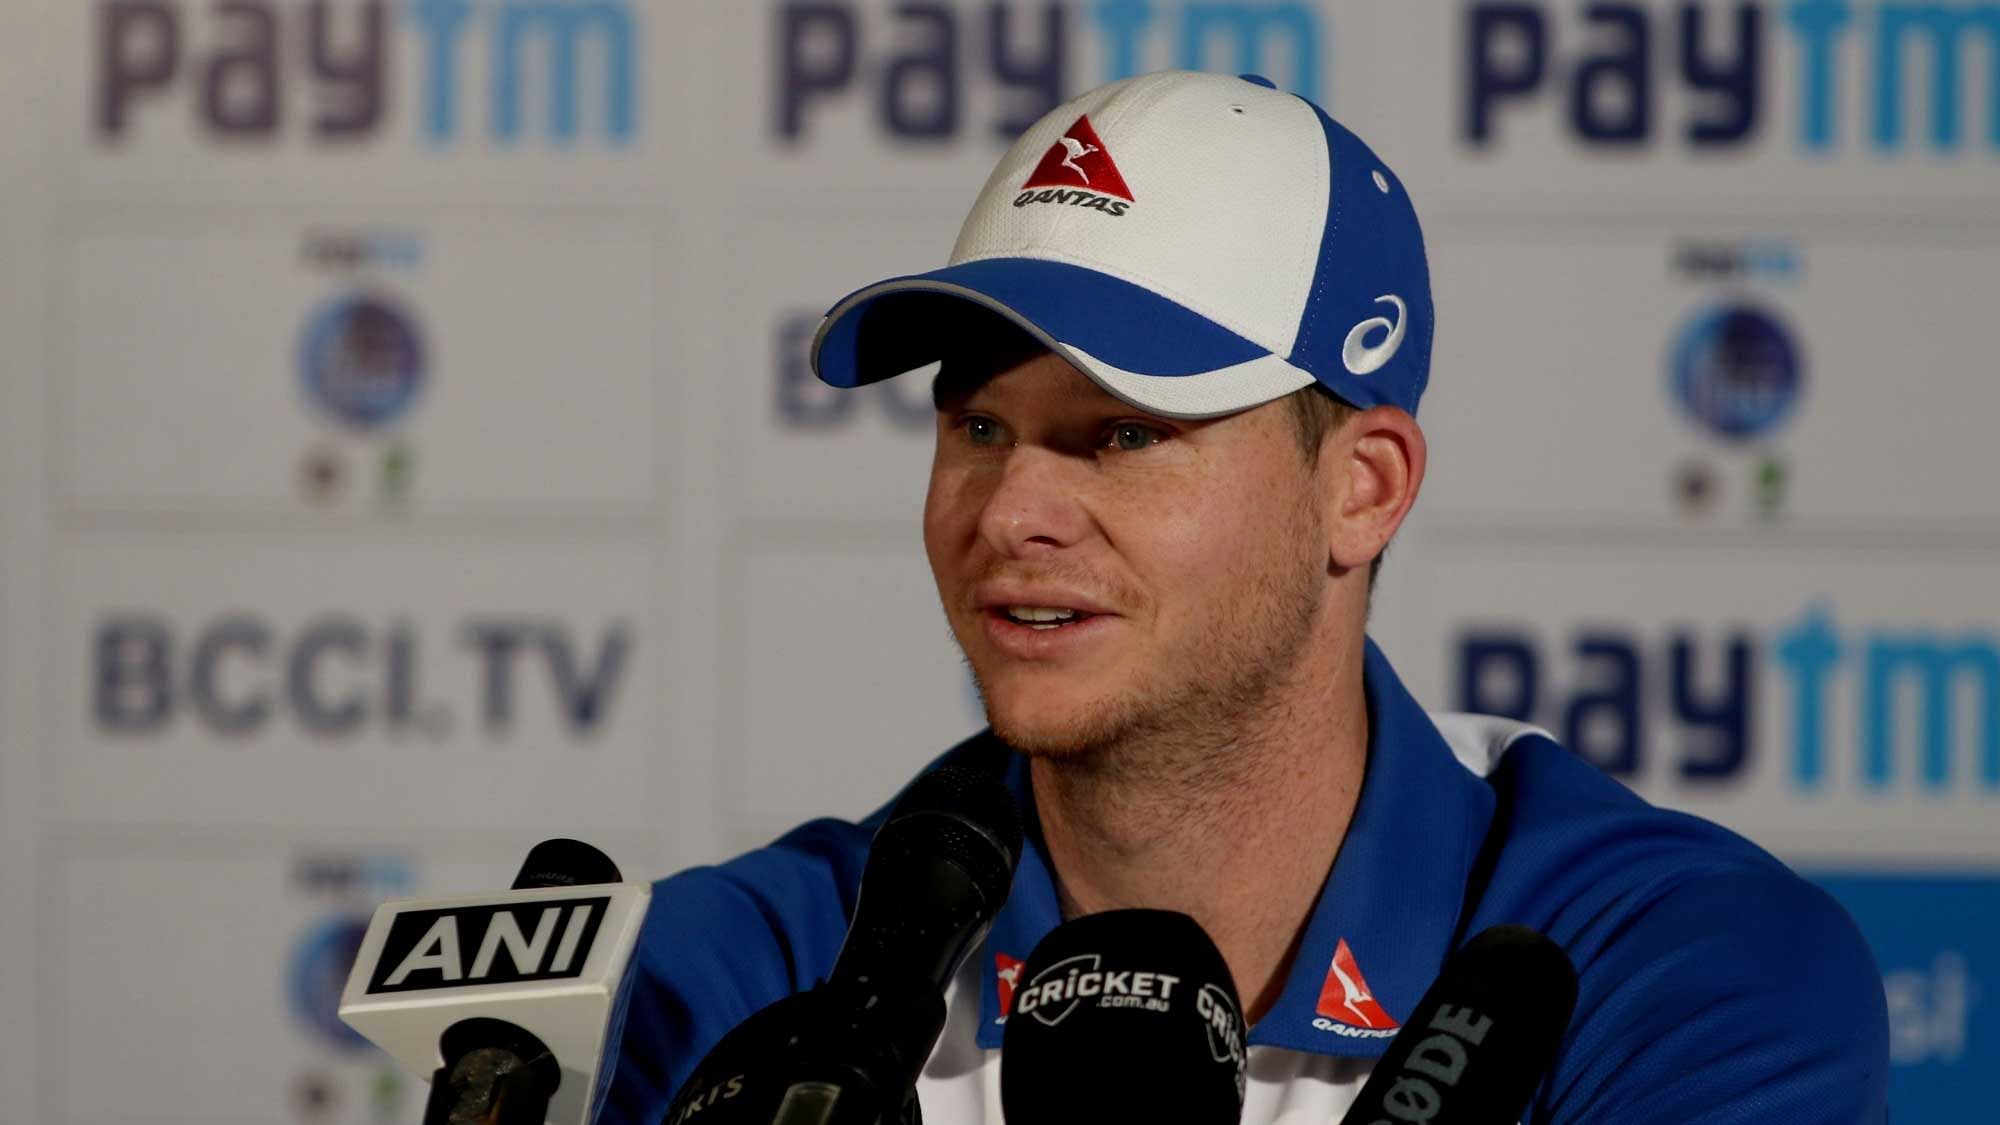 Steve Smith spoke to the media after winning The Ashes in Perth.